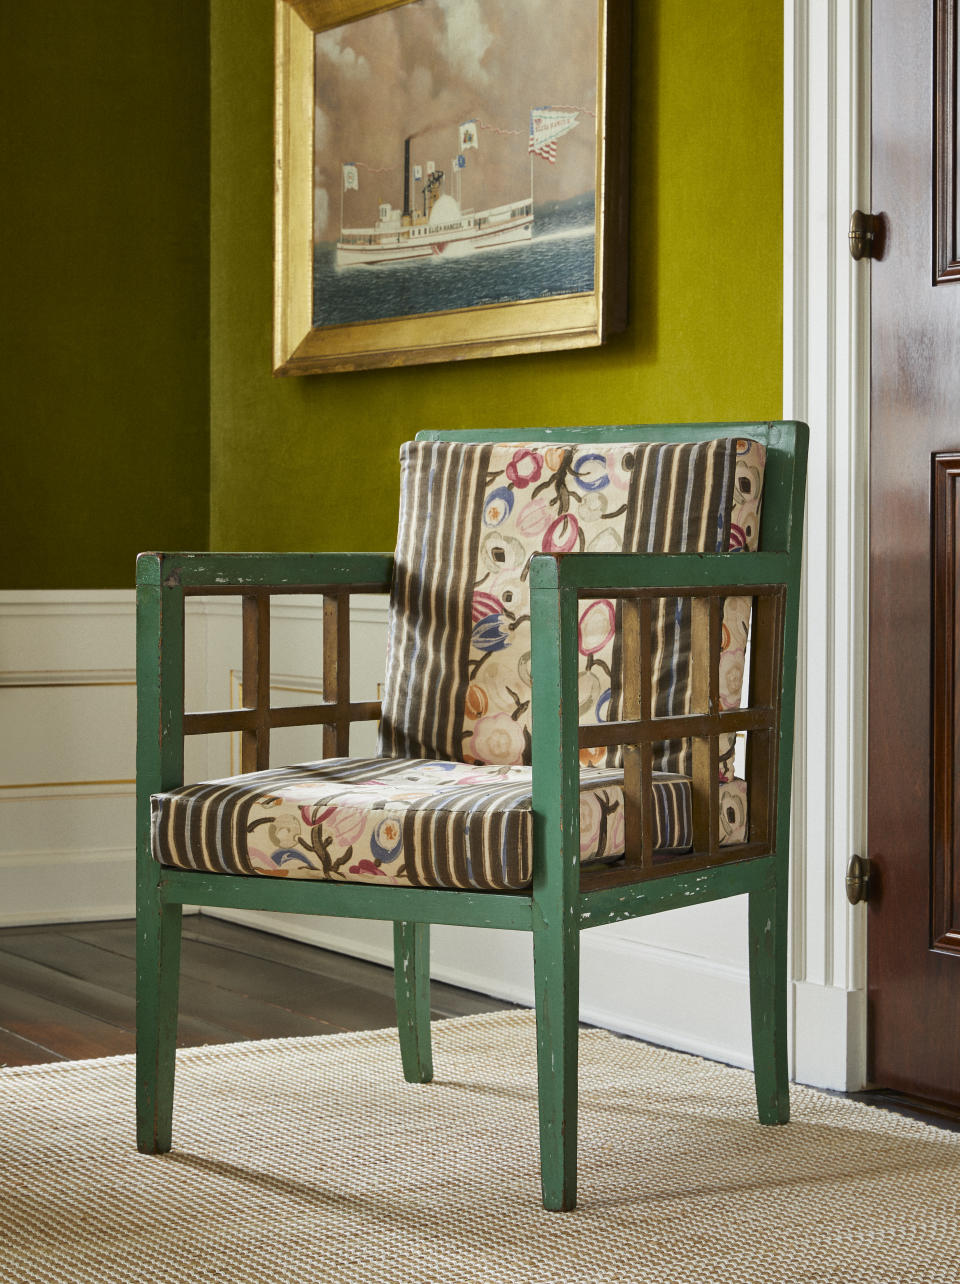 Tory Burch's favorite chair, designed by Paul Poiret.